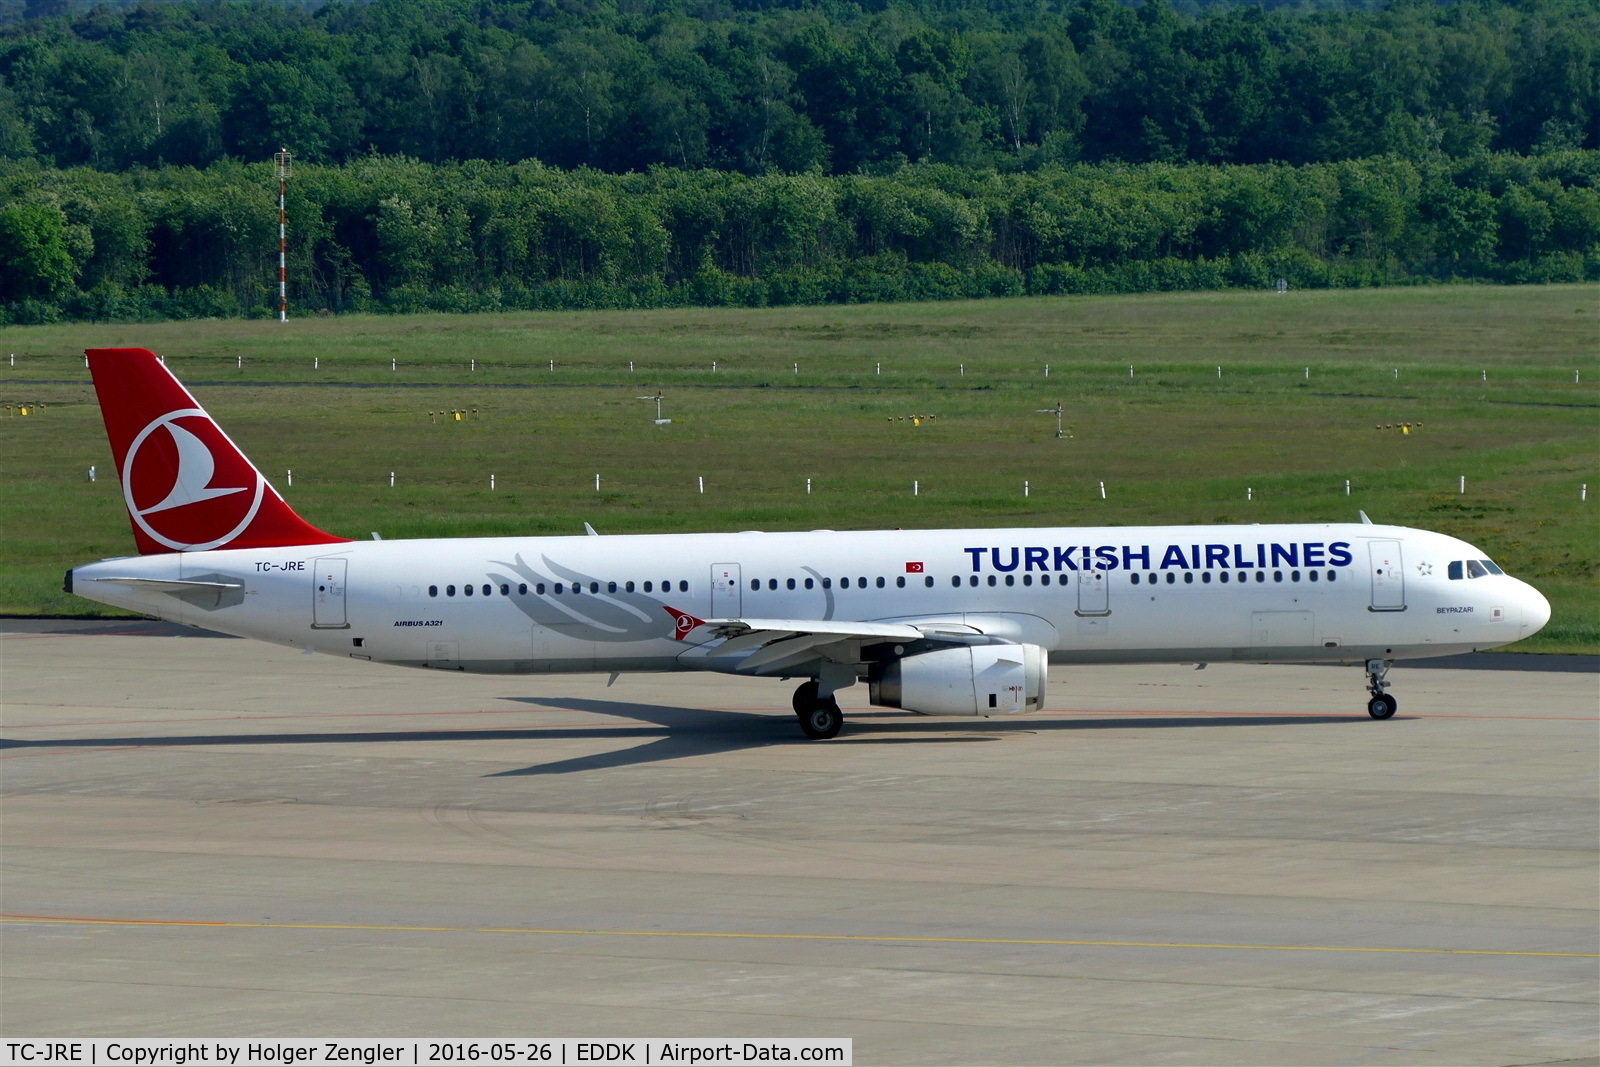 TC-JRE, 2007 Airbus A321-231 C/N 3126, Shuttle to IST on taxi to take-off......